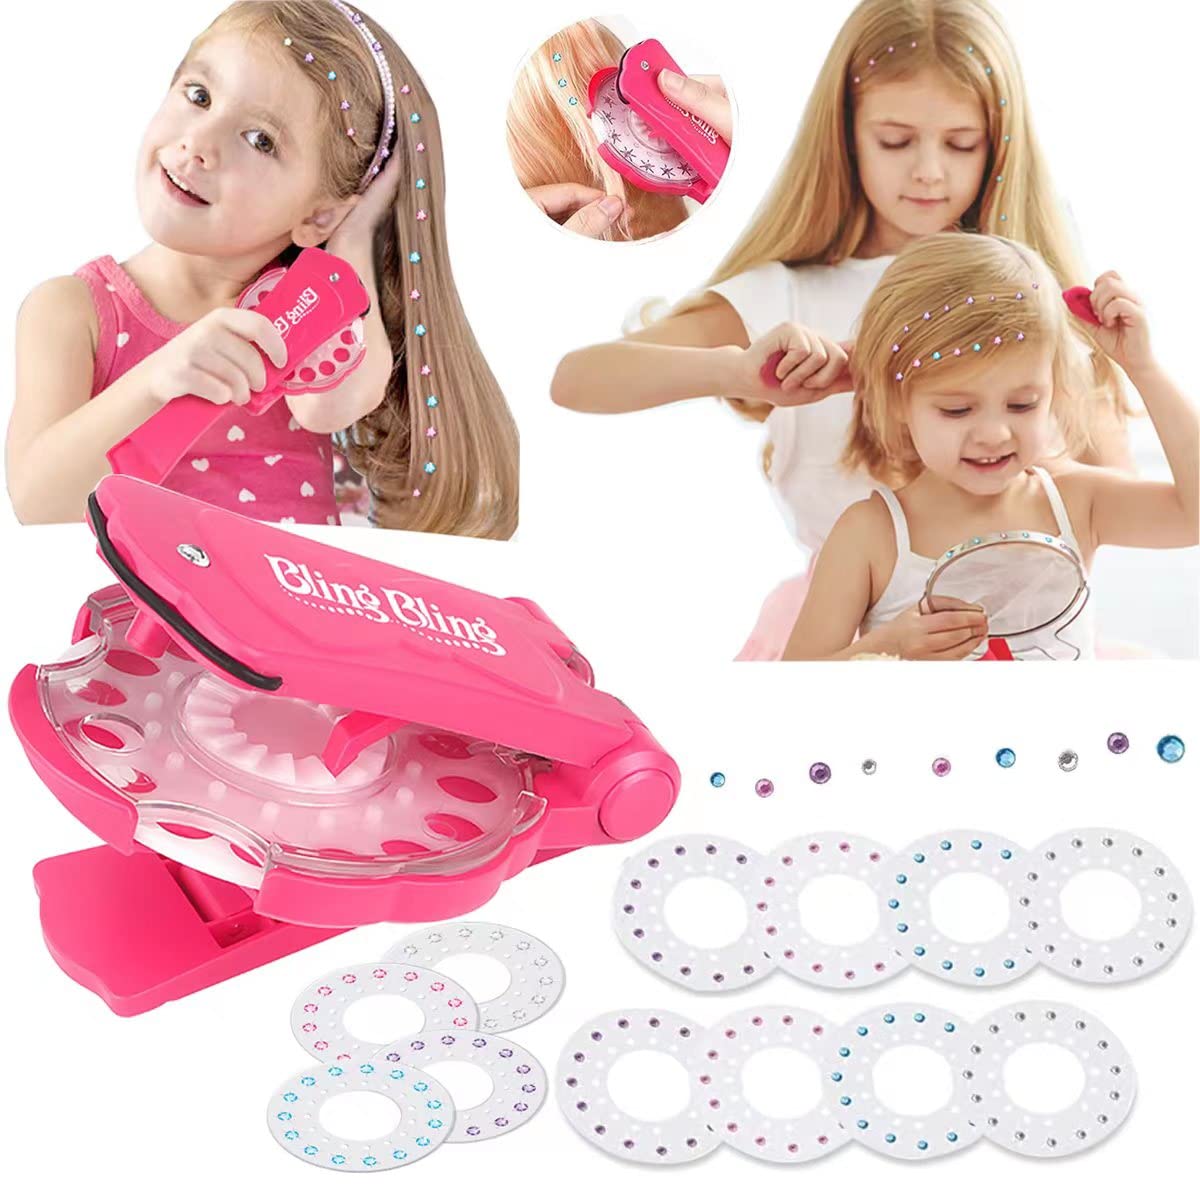 Hair Bedazzler Kit With Rhinestones, Hair Bling Gems For Girls Styling With